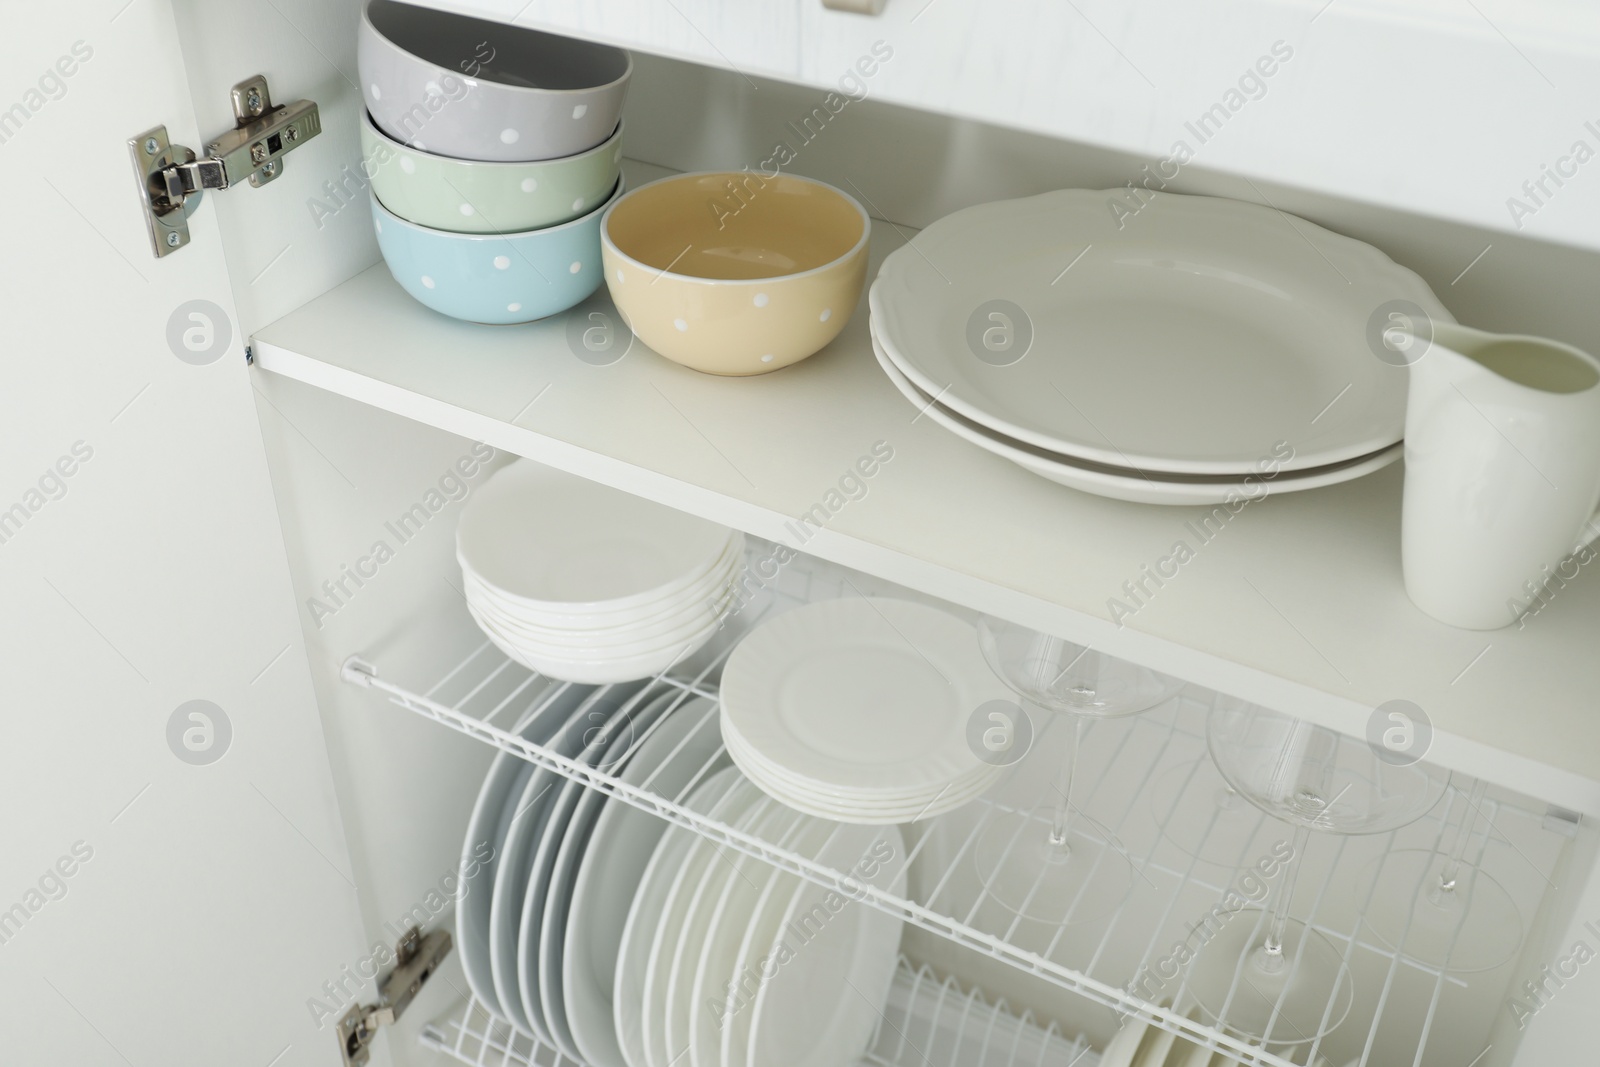 Photo of Clean plates, bowls and glasses on shelves in cabinet indoors